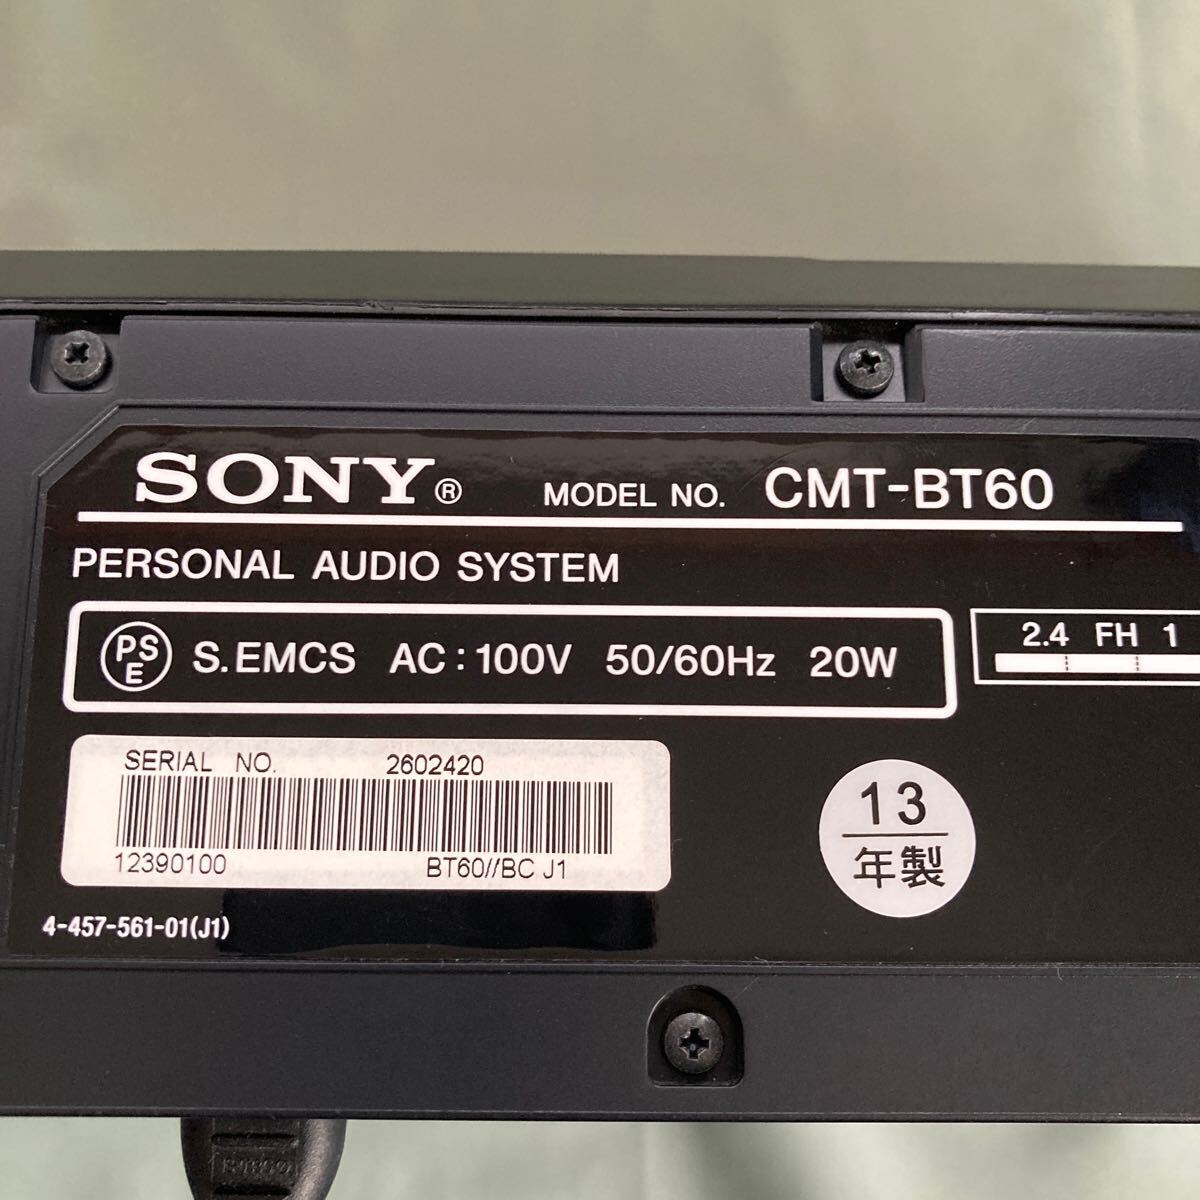 SONY Sony CMT-BT60 personal audio system 2013 year made remote control power cord attaching 